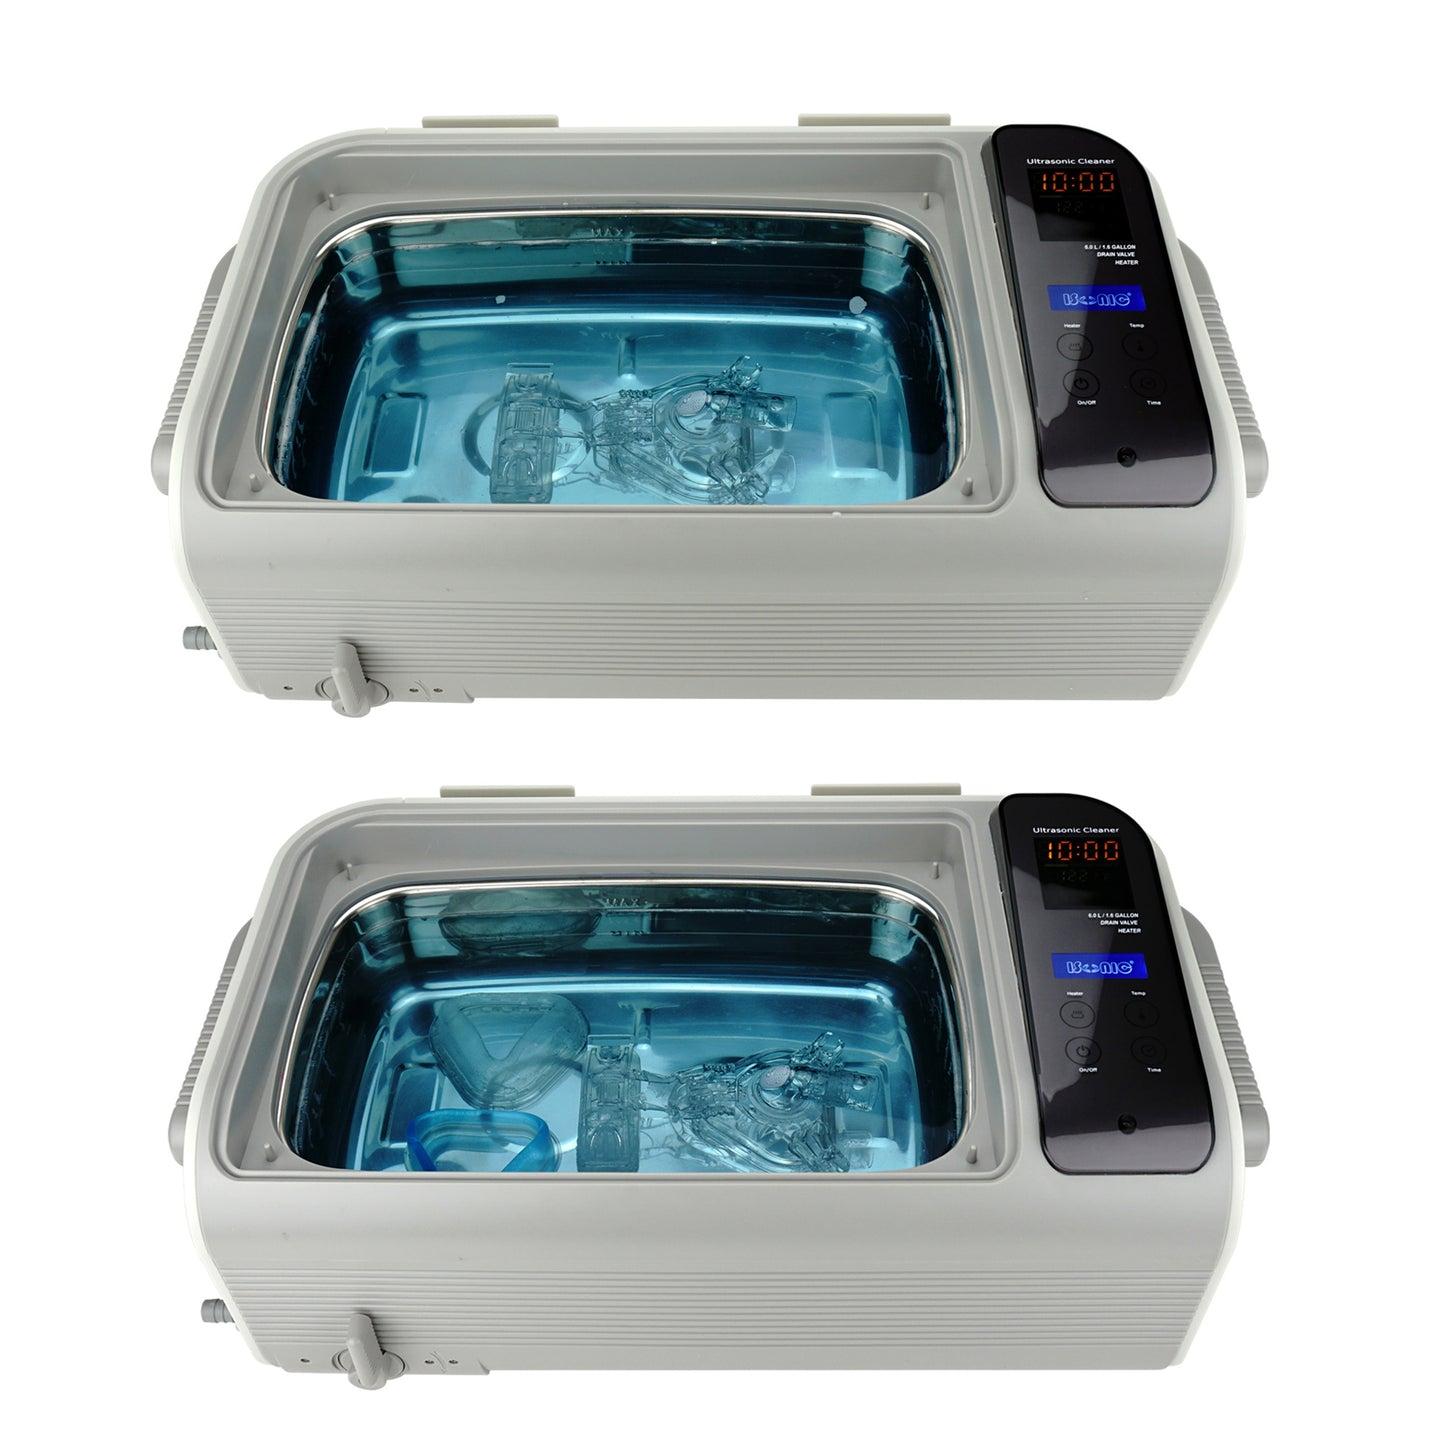 P4862-CPAP (large, lightly used) | iSonic® Ultrasonic CPAP/BiPAP Cleaner, 1.6Gal/6L, with a stainless steel weight bracket, a box of cleaning tablet, heater, drain. Free Shipping!